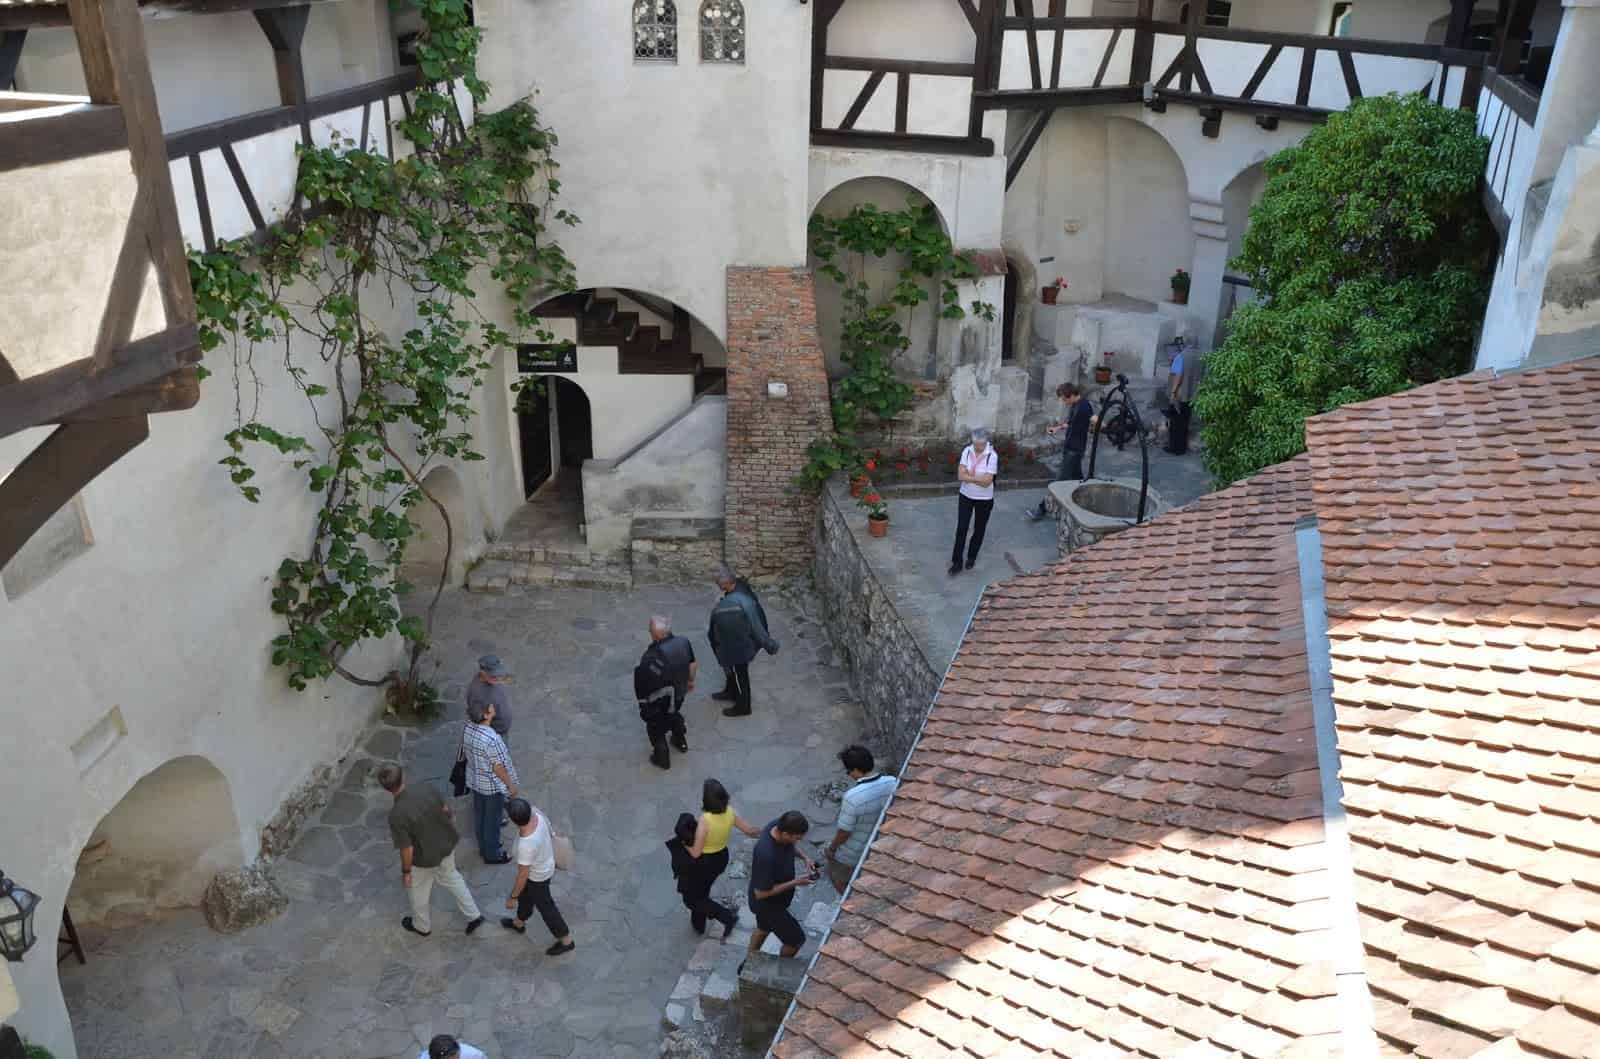 Looking down on the inner courtyard at Bran Castle in Bran, Romania